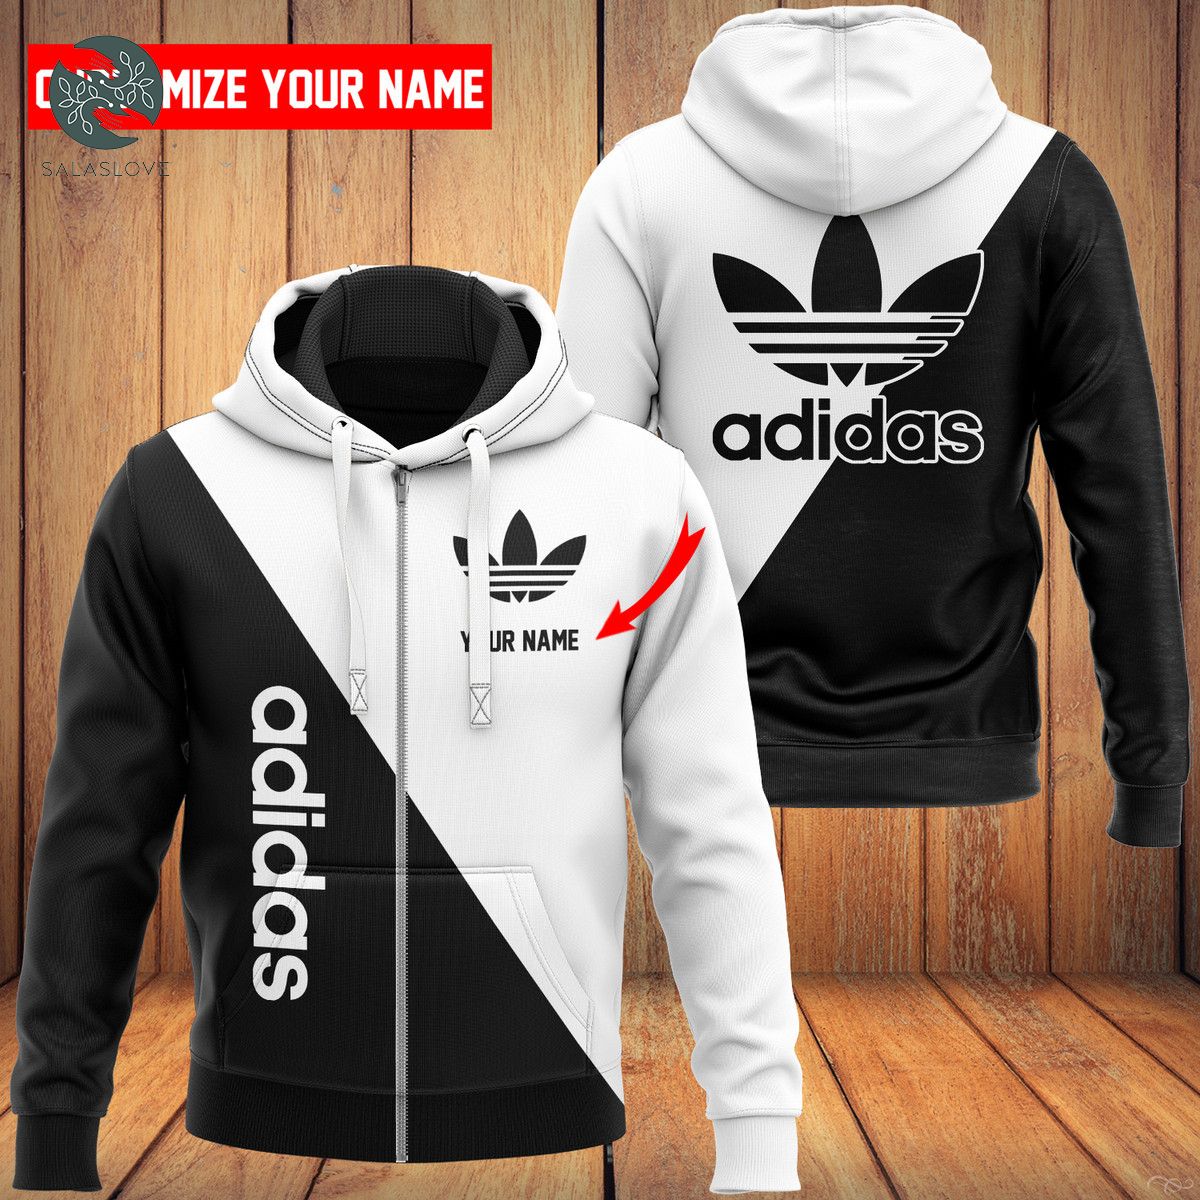 Adidas Customize Your Name Unisex Hoodie